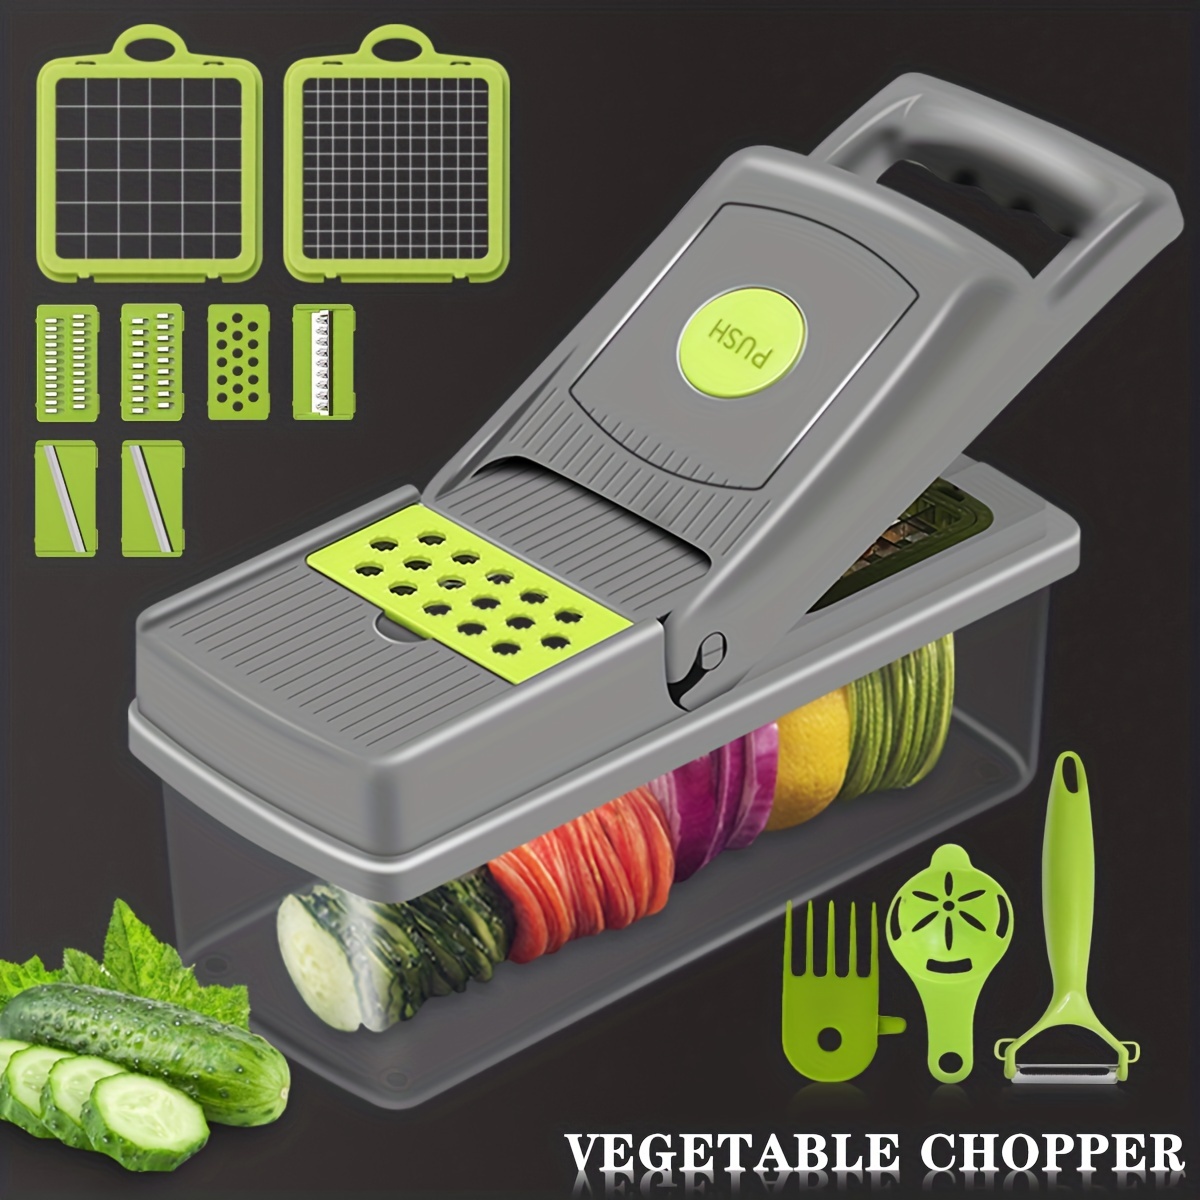 1pc Multi-purpose Vegetable Slicer For Home Use: Suitable For Making Potatp  Strips, Carrot Strips, Scraping, Etc. With A Variety Of Vegetables And  Fruits; Kitchen Tools